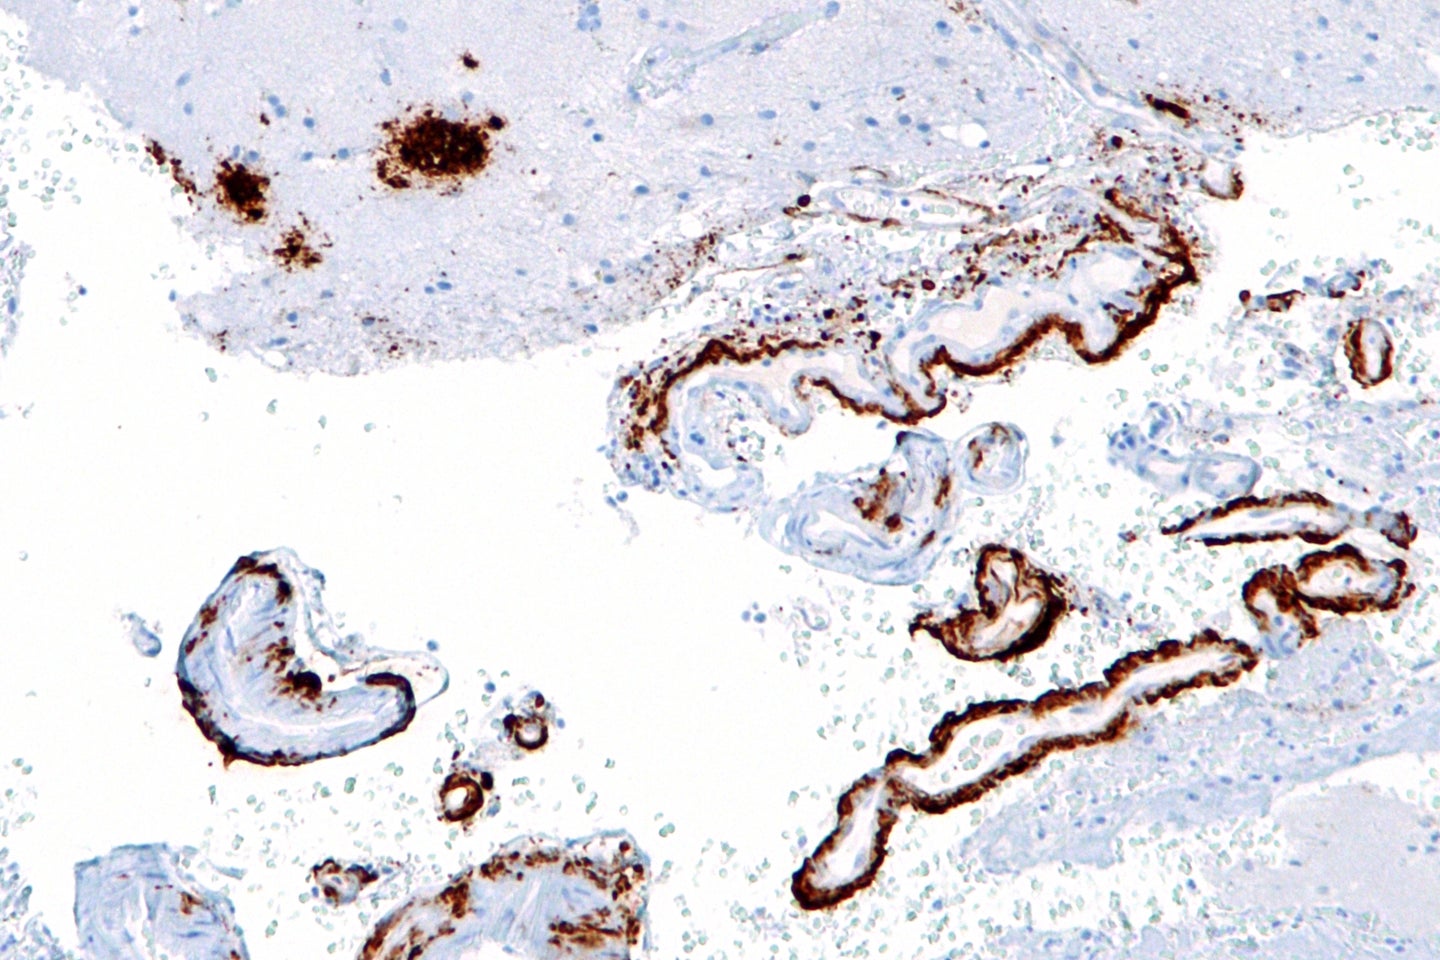 This micrograph shows a buildup of beta amyloid proteins, brown, in a patient's cortex.